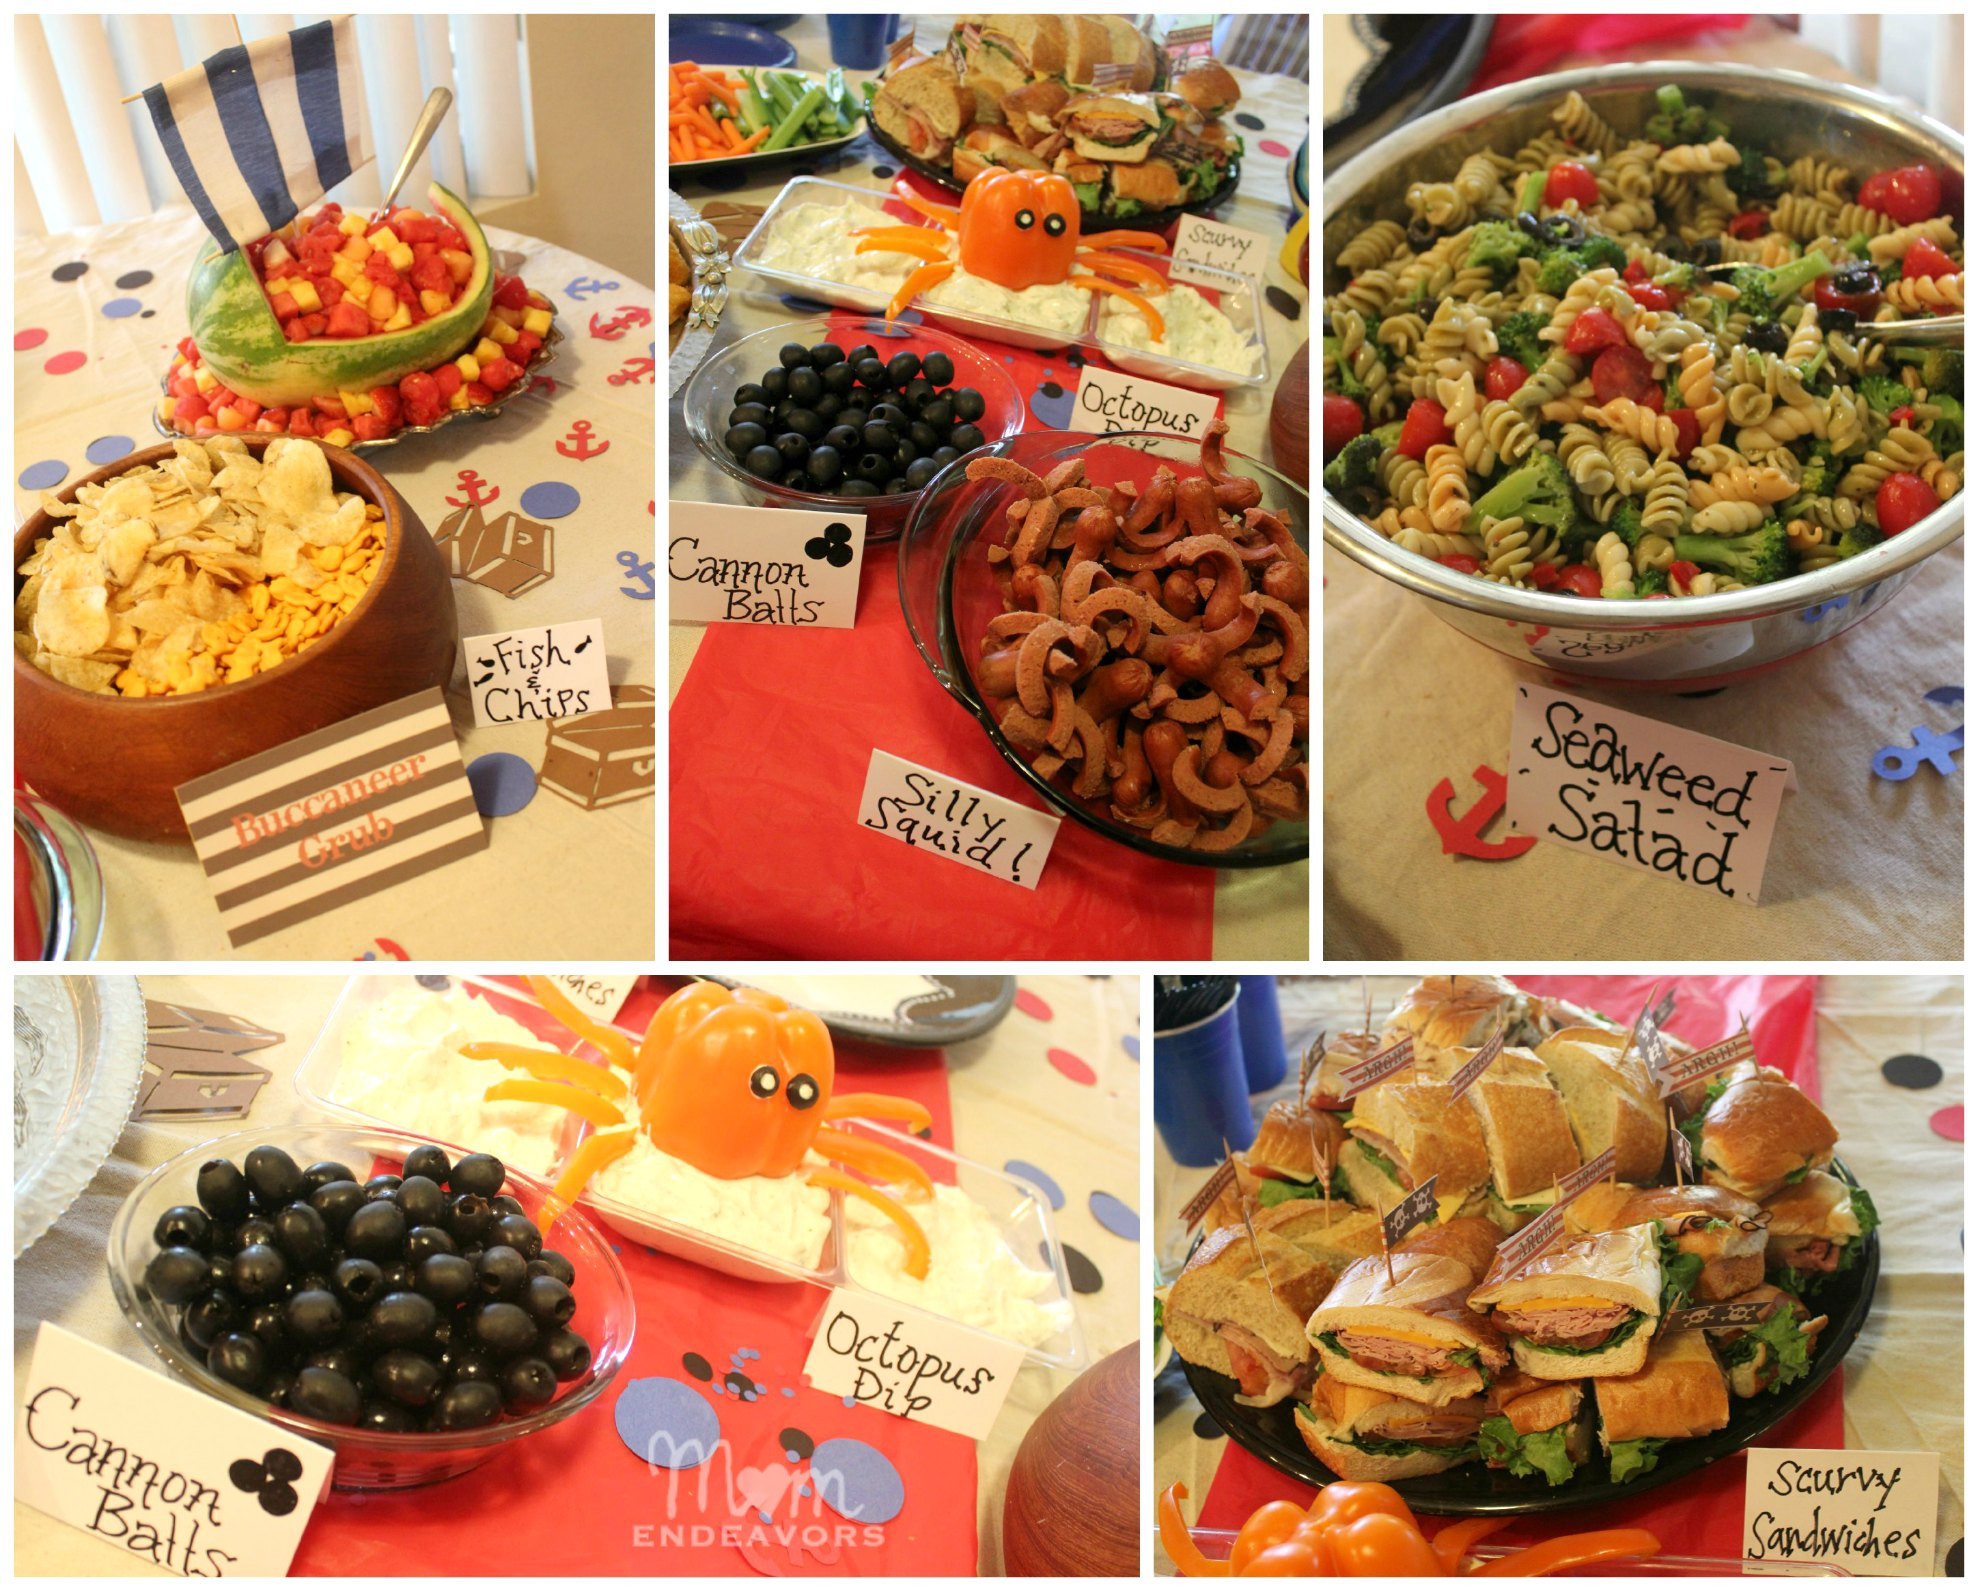 Pirate Party Food Ideas
 Jake and the Never Land Pirates Birthday Party Food